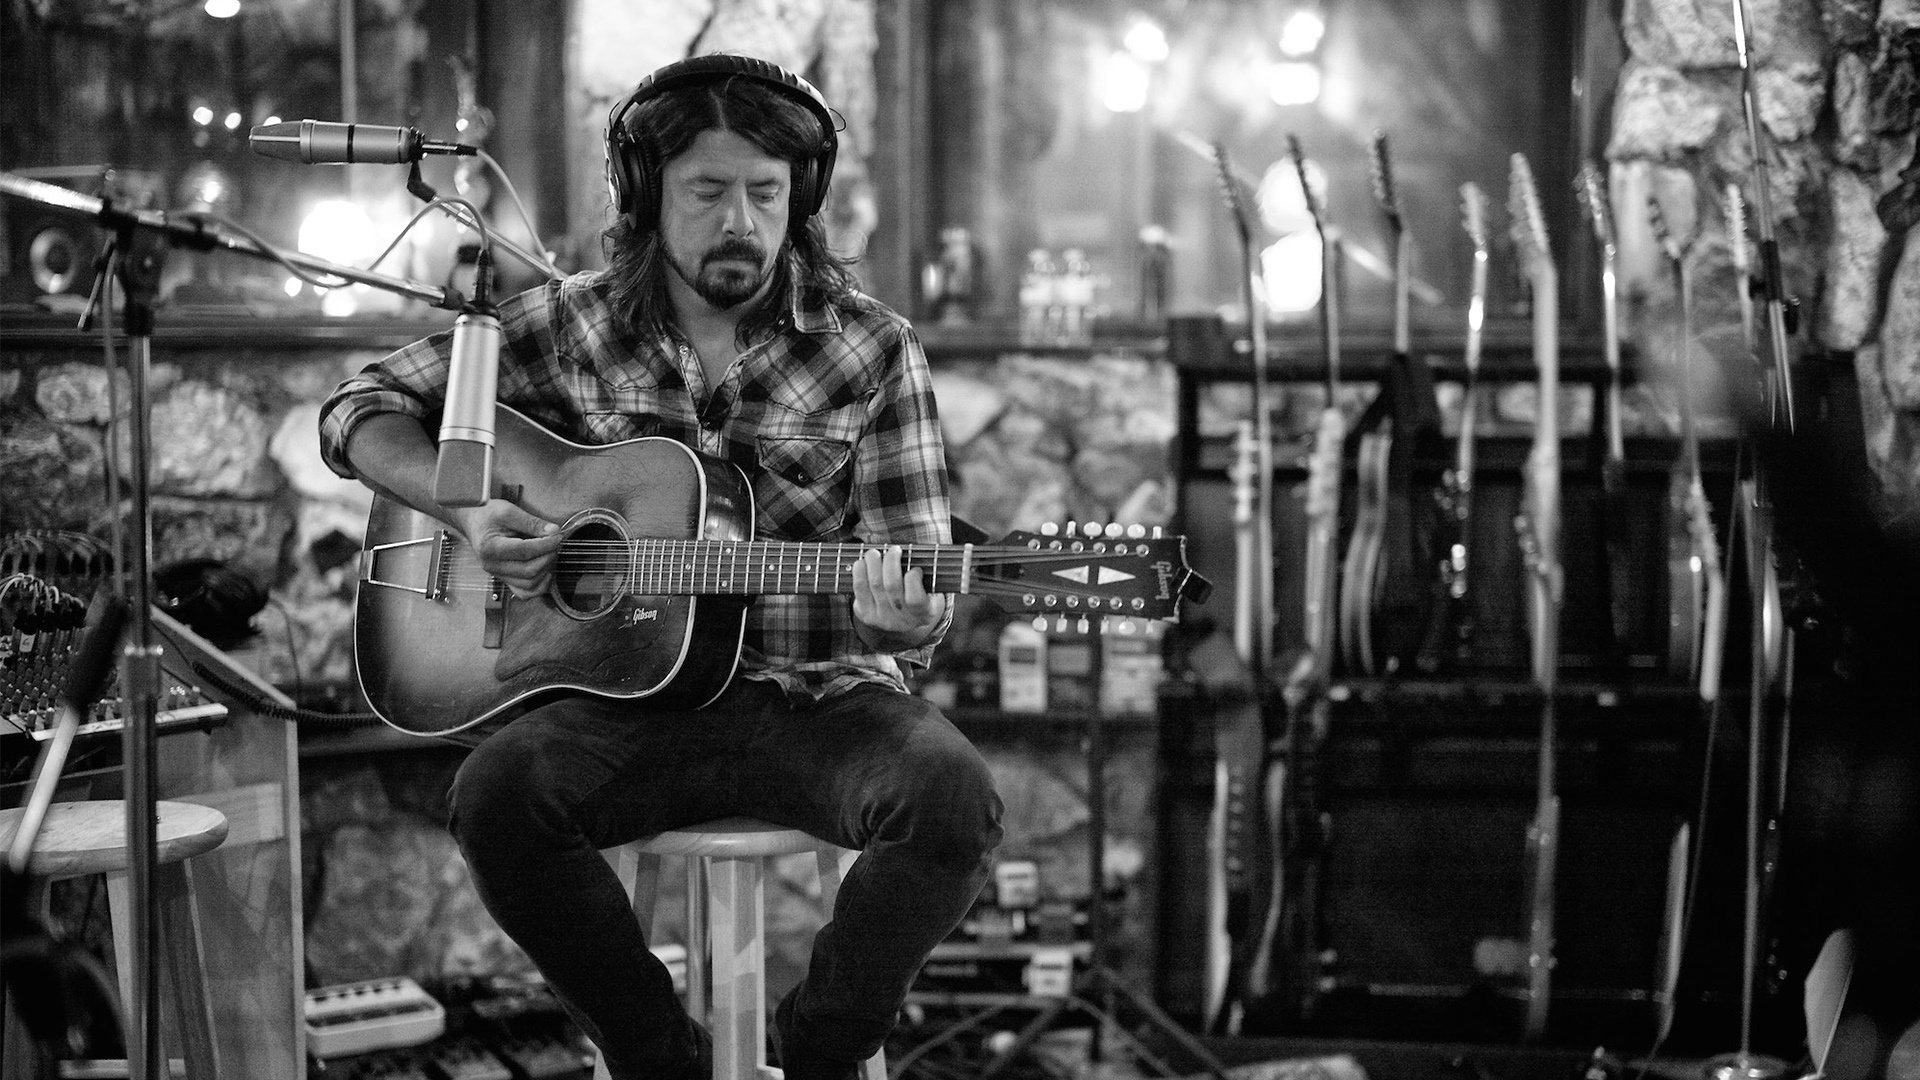 Dave Grohl, Wallpaper posted by John Anderson, Artistic expressions, Musical passion, 1920x1080 Full HD Desktop